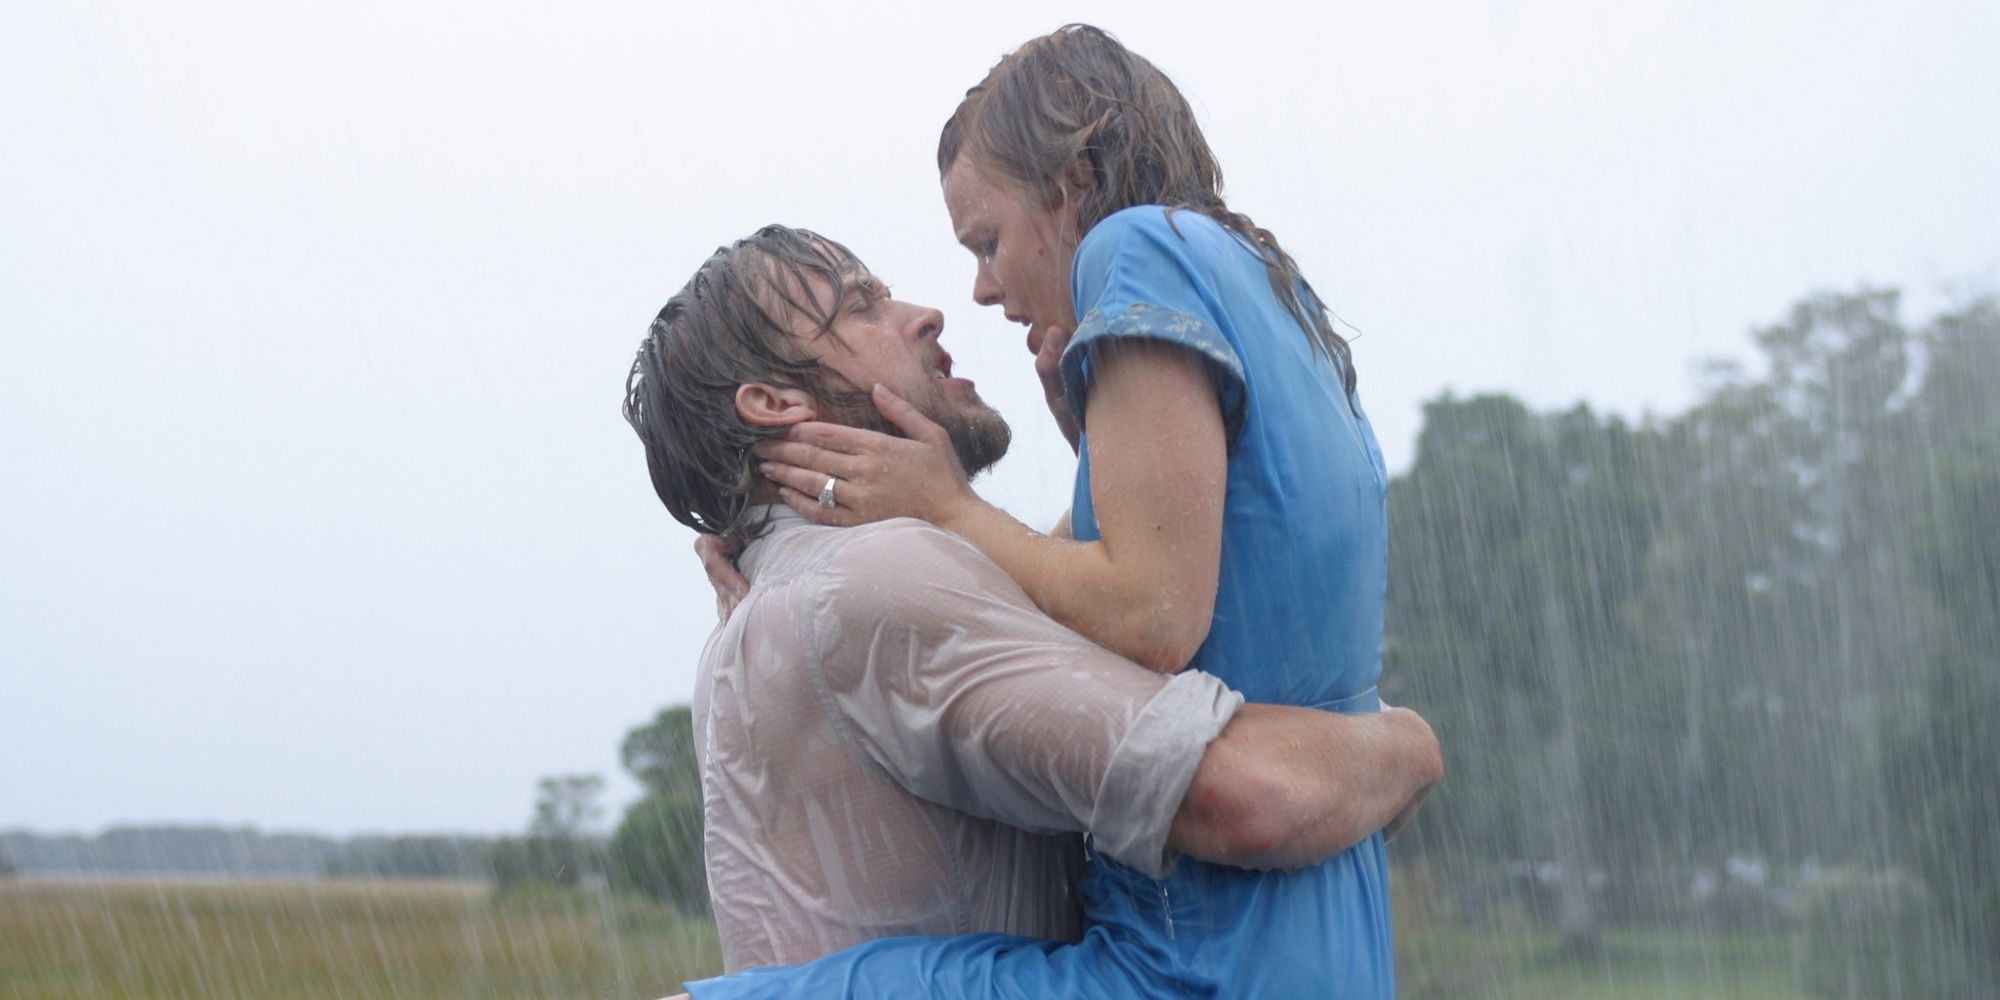 The Notebook Ending Explained: Alternate Streaming Version, Noah & Allie’s Fate